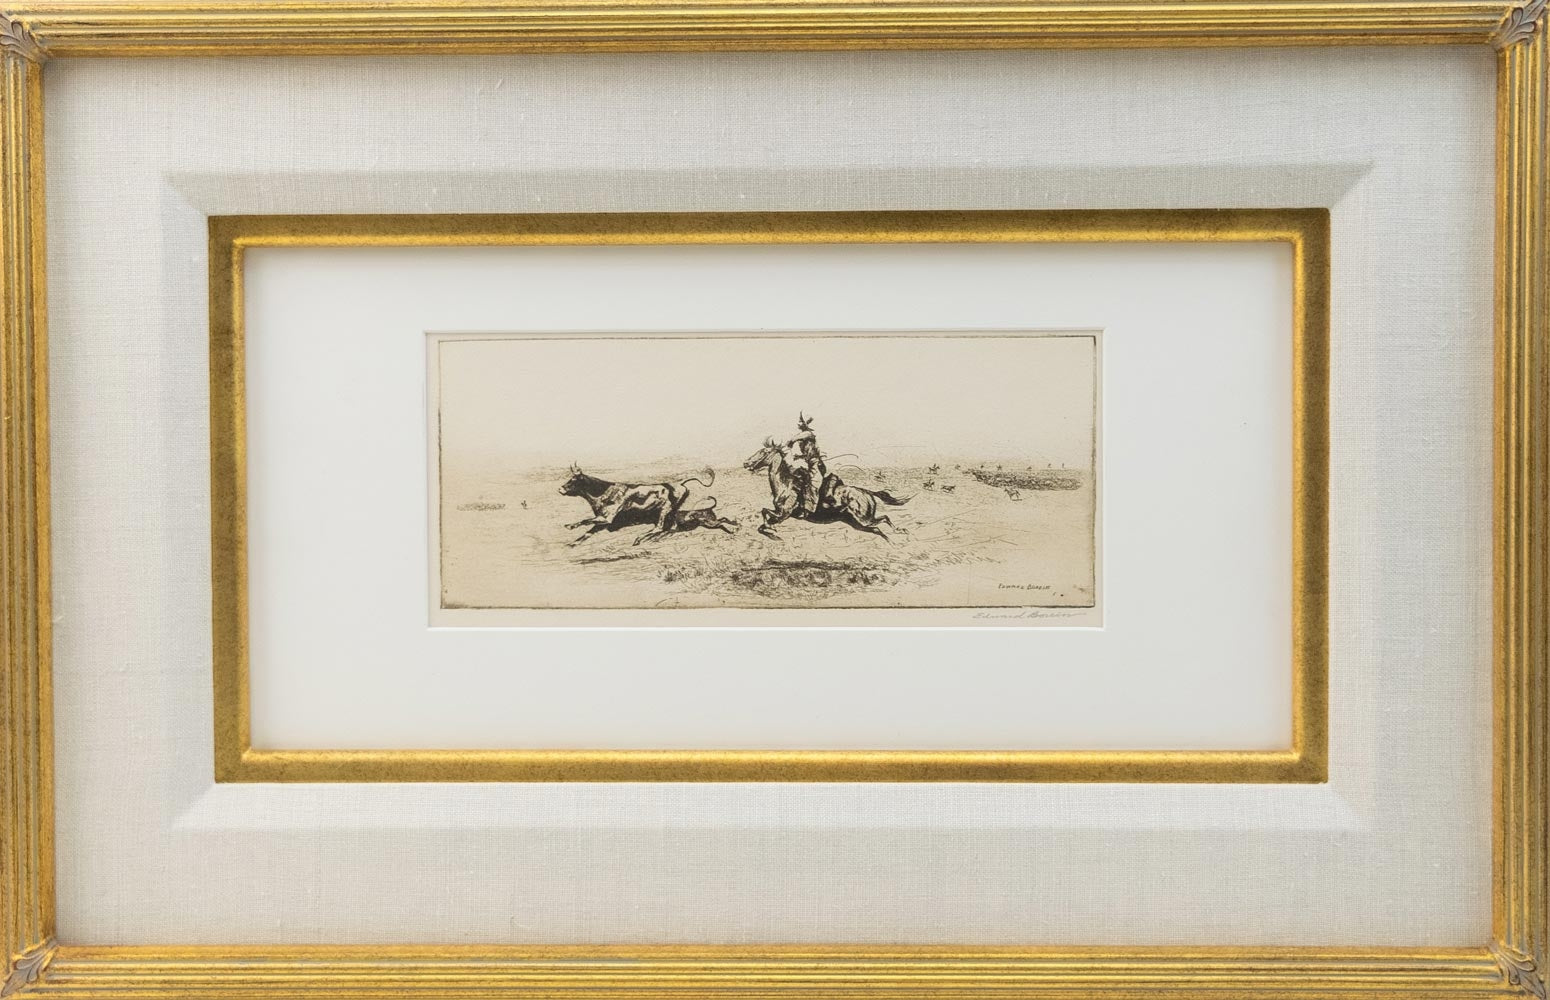 SOLD Edward Borein (1872-1945) - Etching of Steer and Cowboy